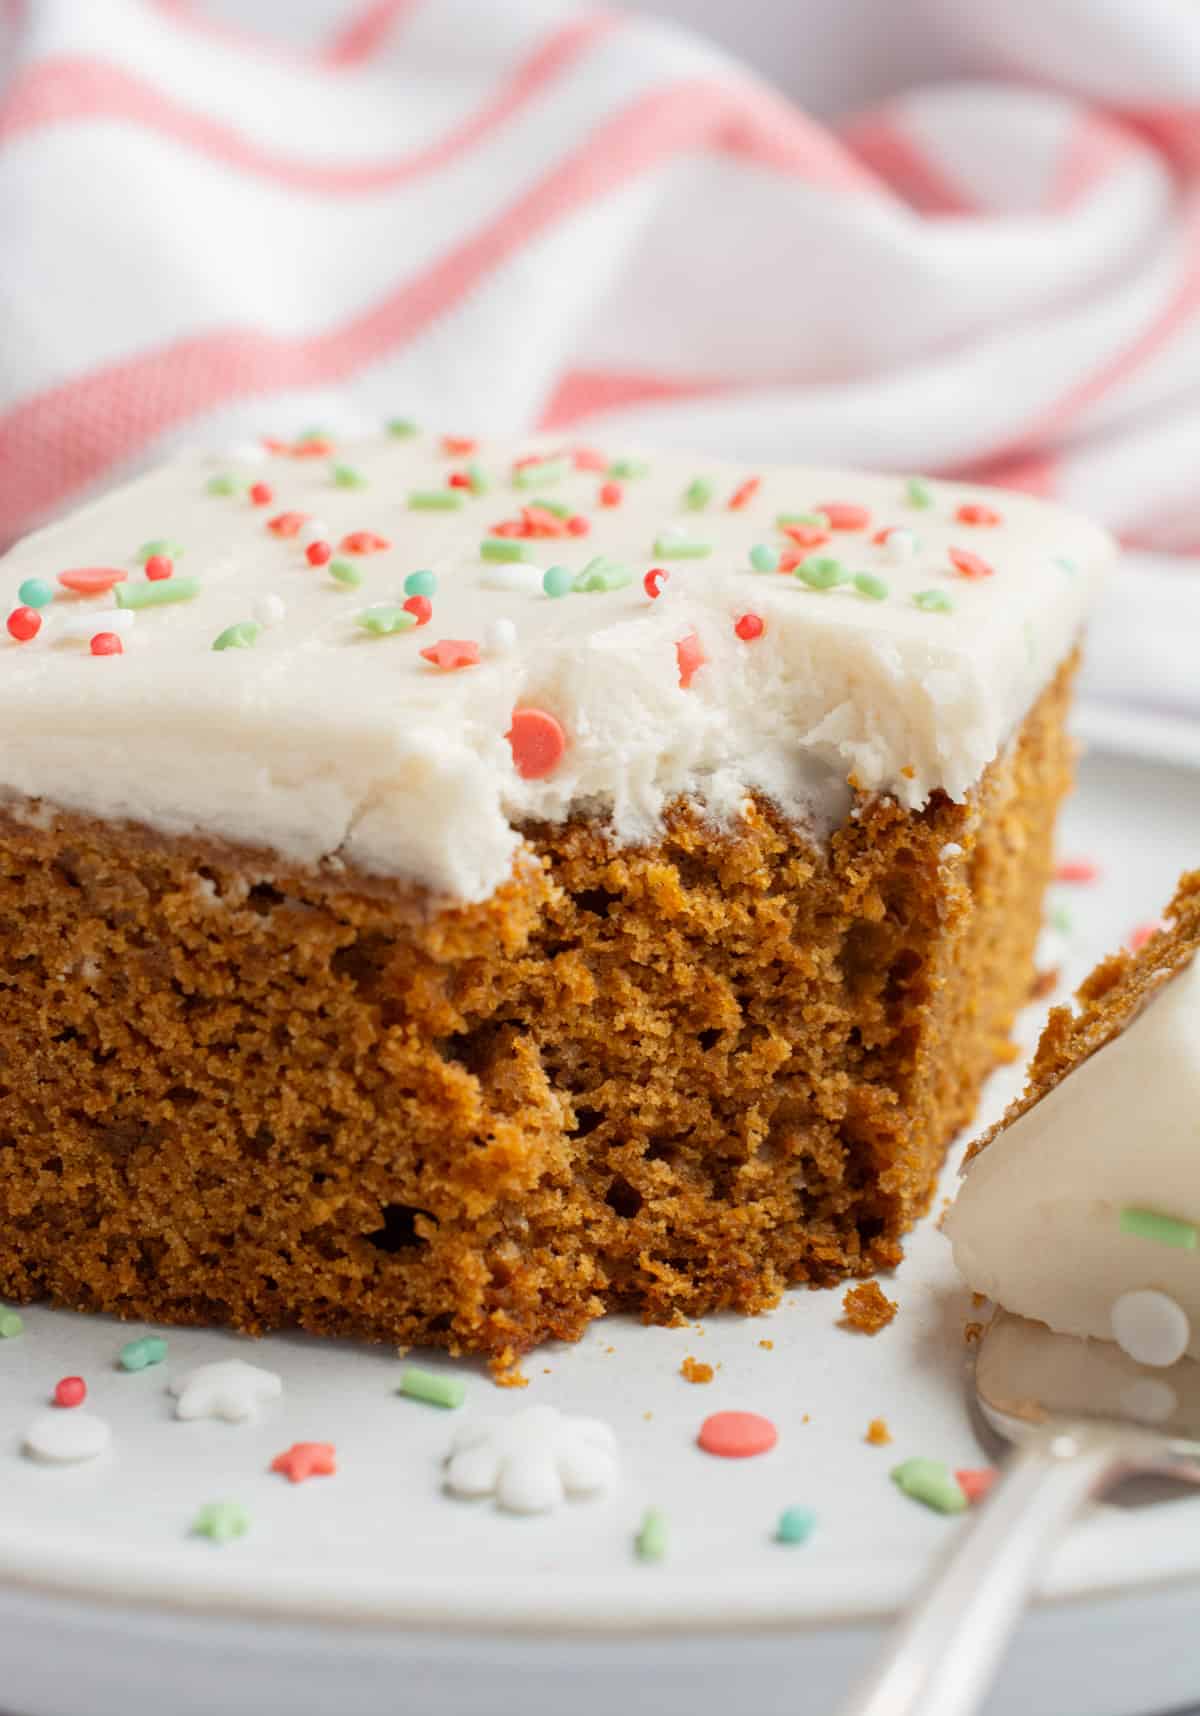 A slice of vegan gingerbread cake topped with frosting and festive Christmas sprinkles with a piece taken out with af fork.